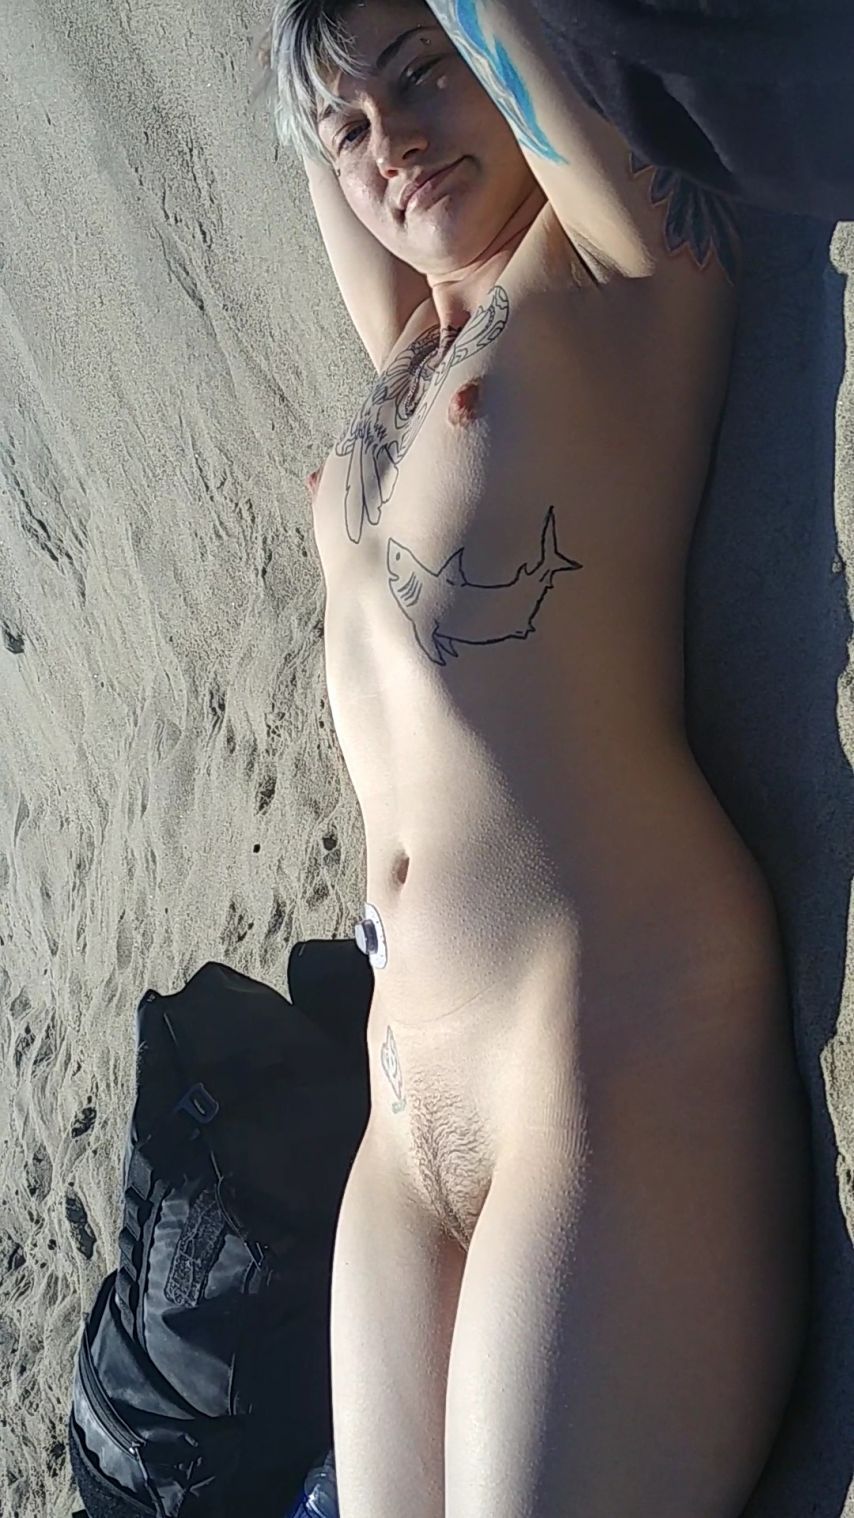 Naked in Public. At the beach